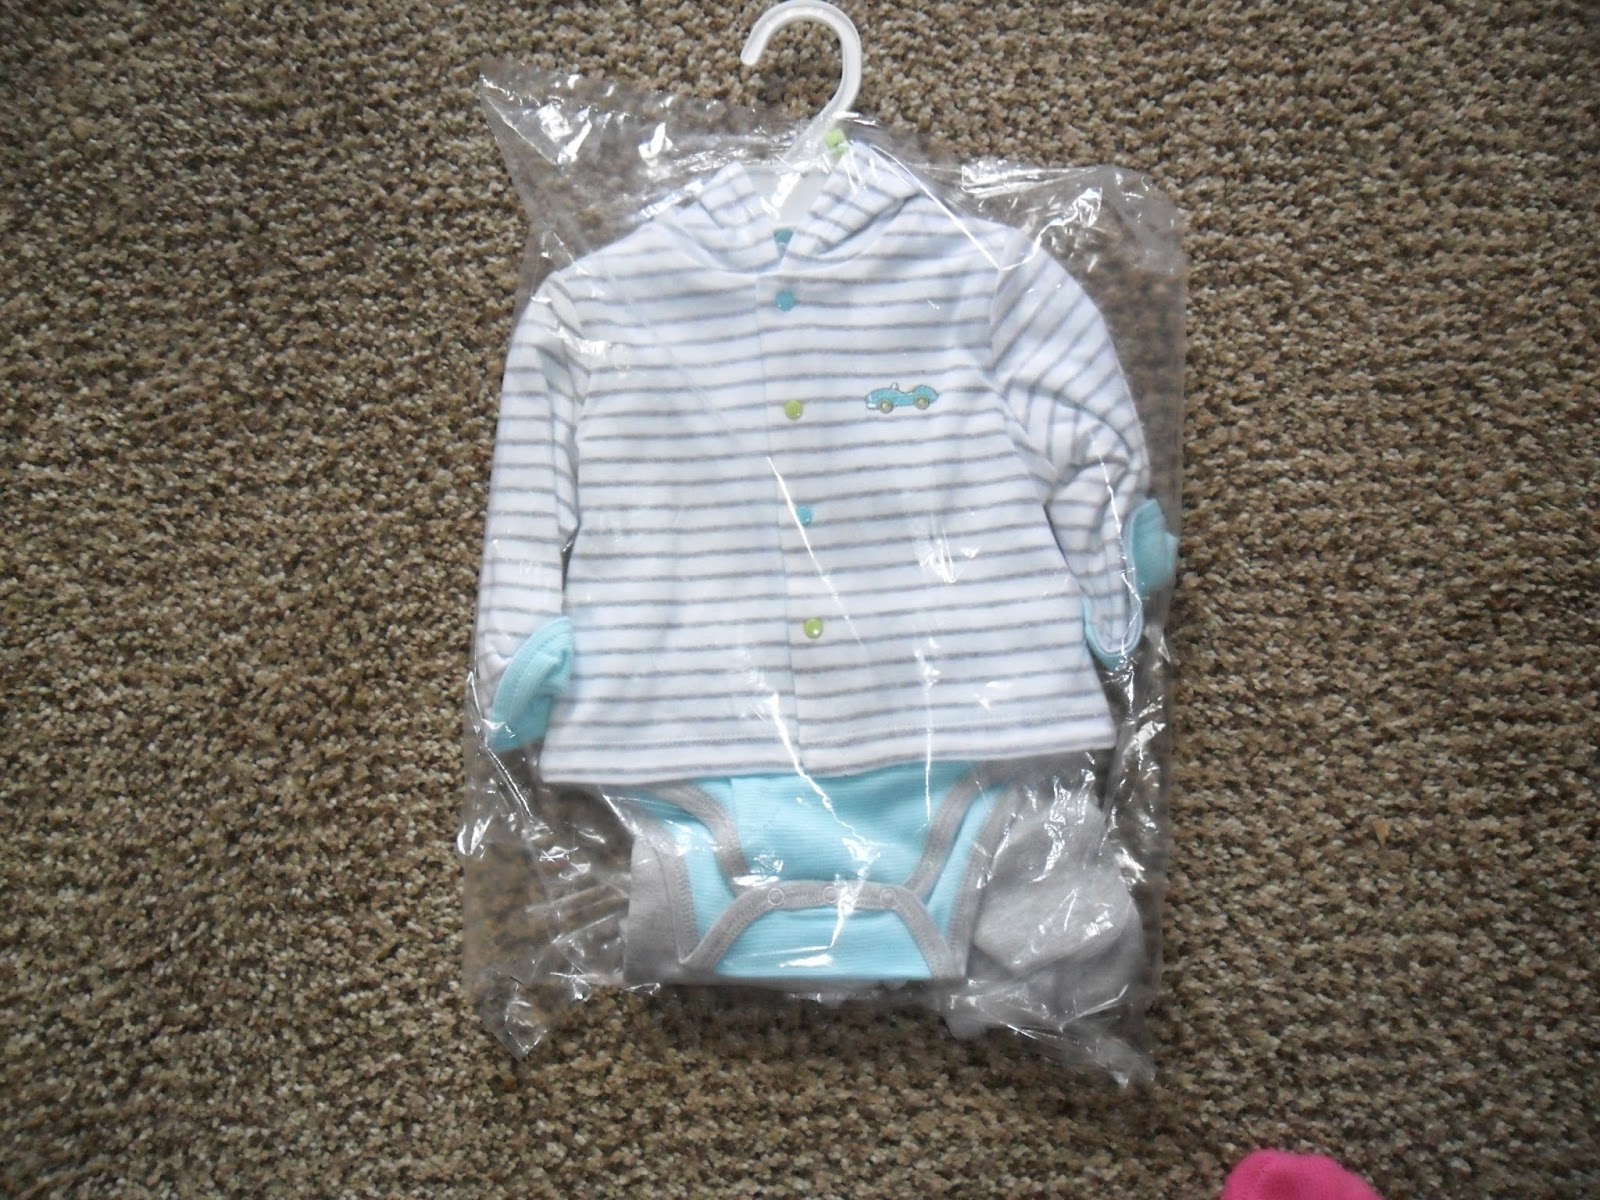 Little Me fashion for babies. Review  (Blu me away or Pink of me Event)